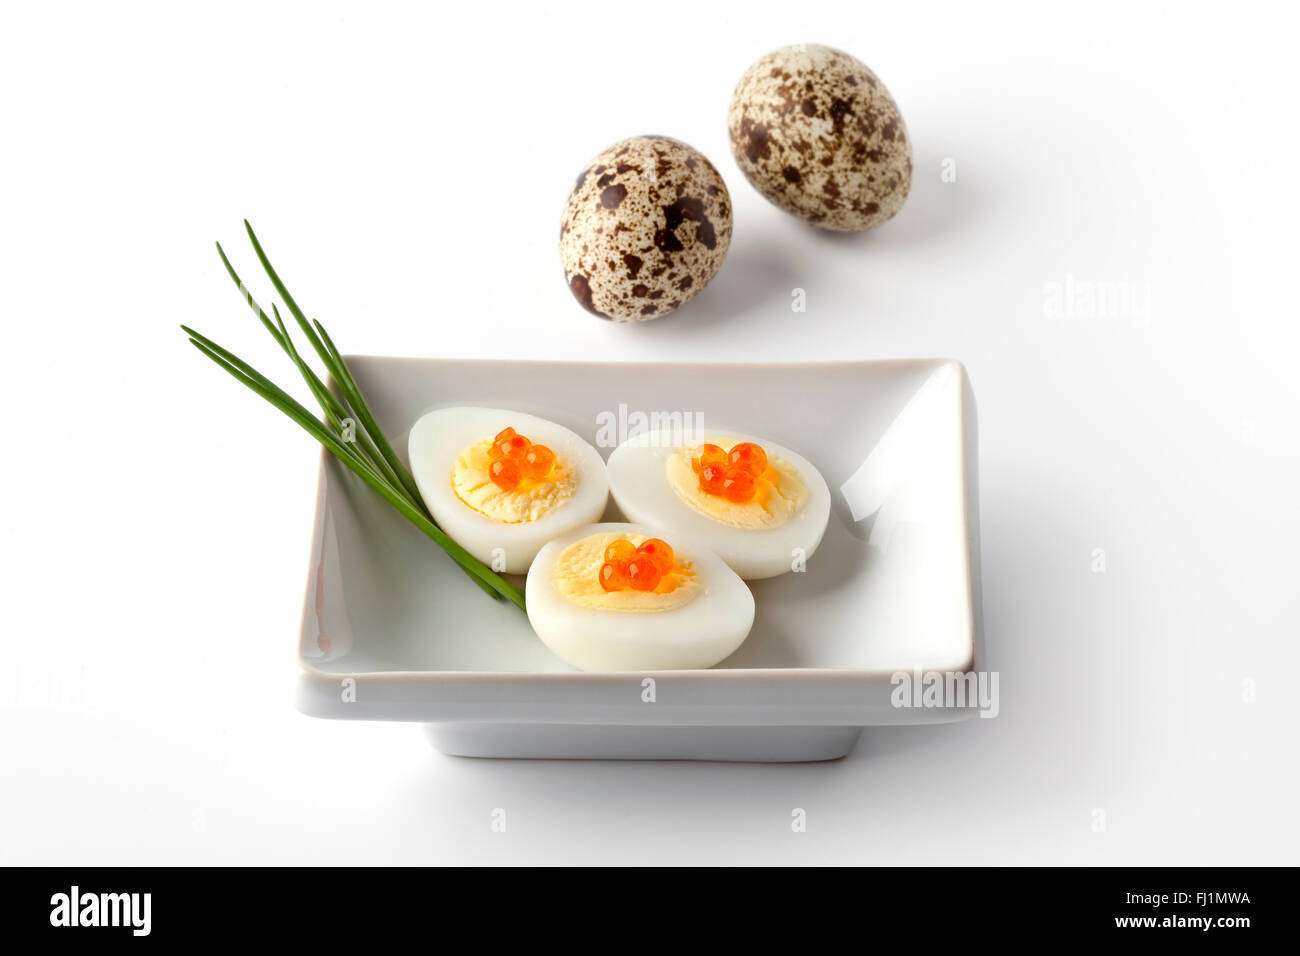 Boiled quail eggs with trout eggs and chive on white background Stock Photo